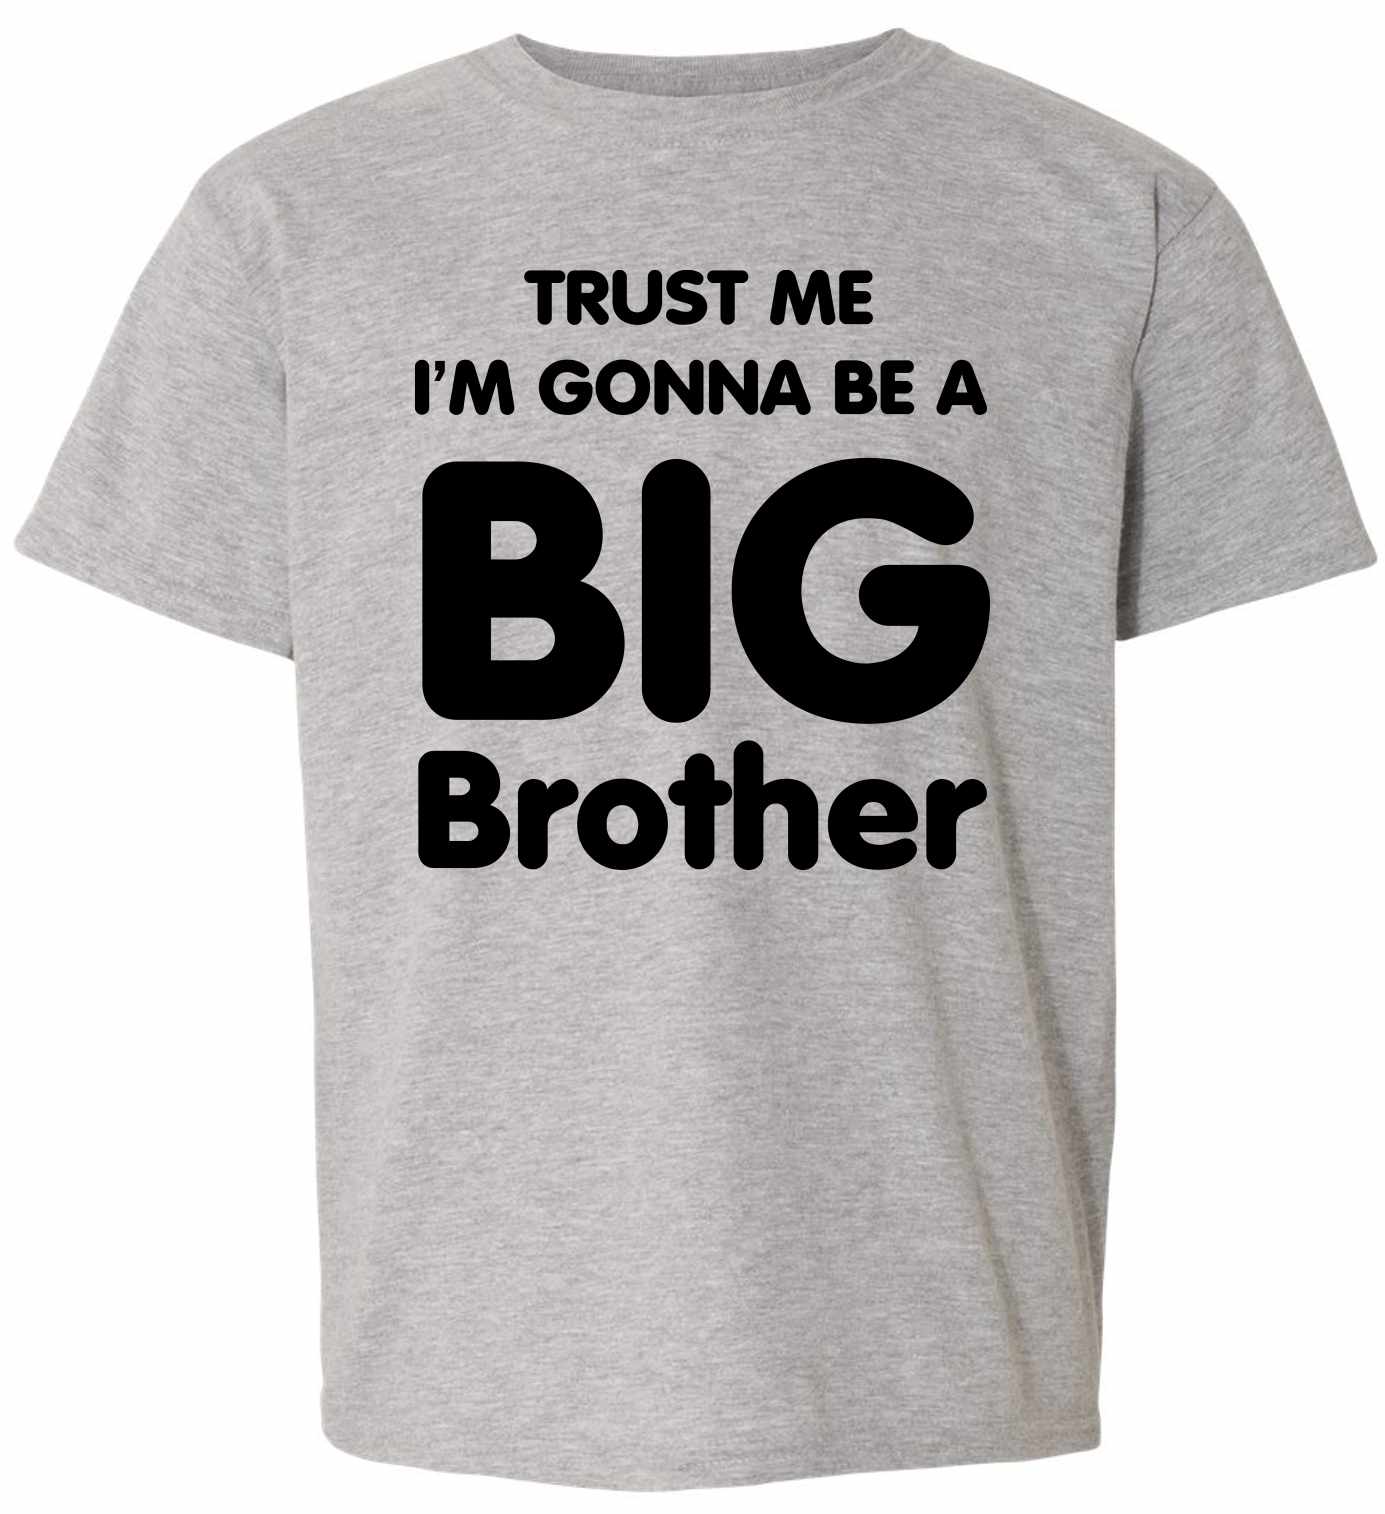 Trust Me I'm Gonna be a Big Brother on Kids T-Shirt (#810-201)